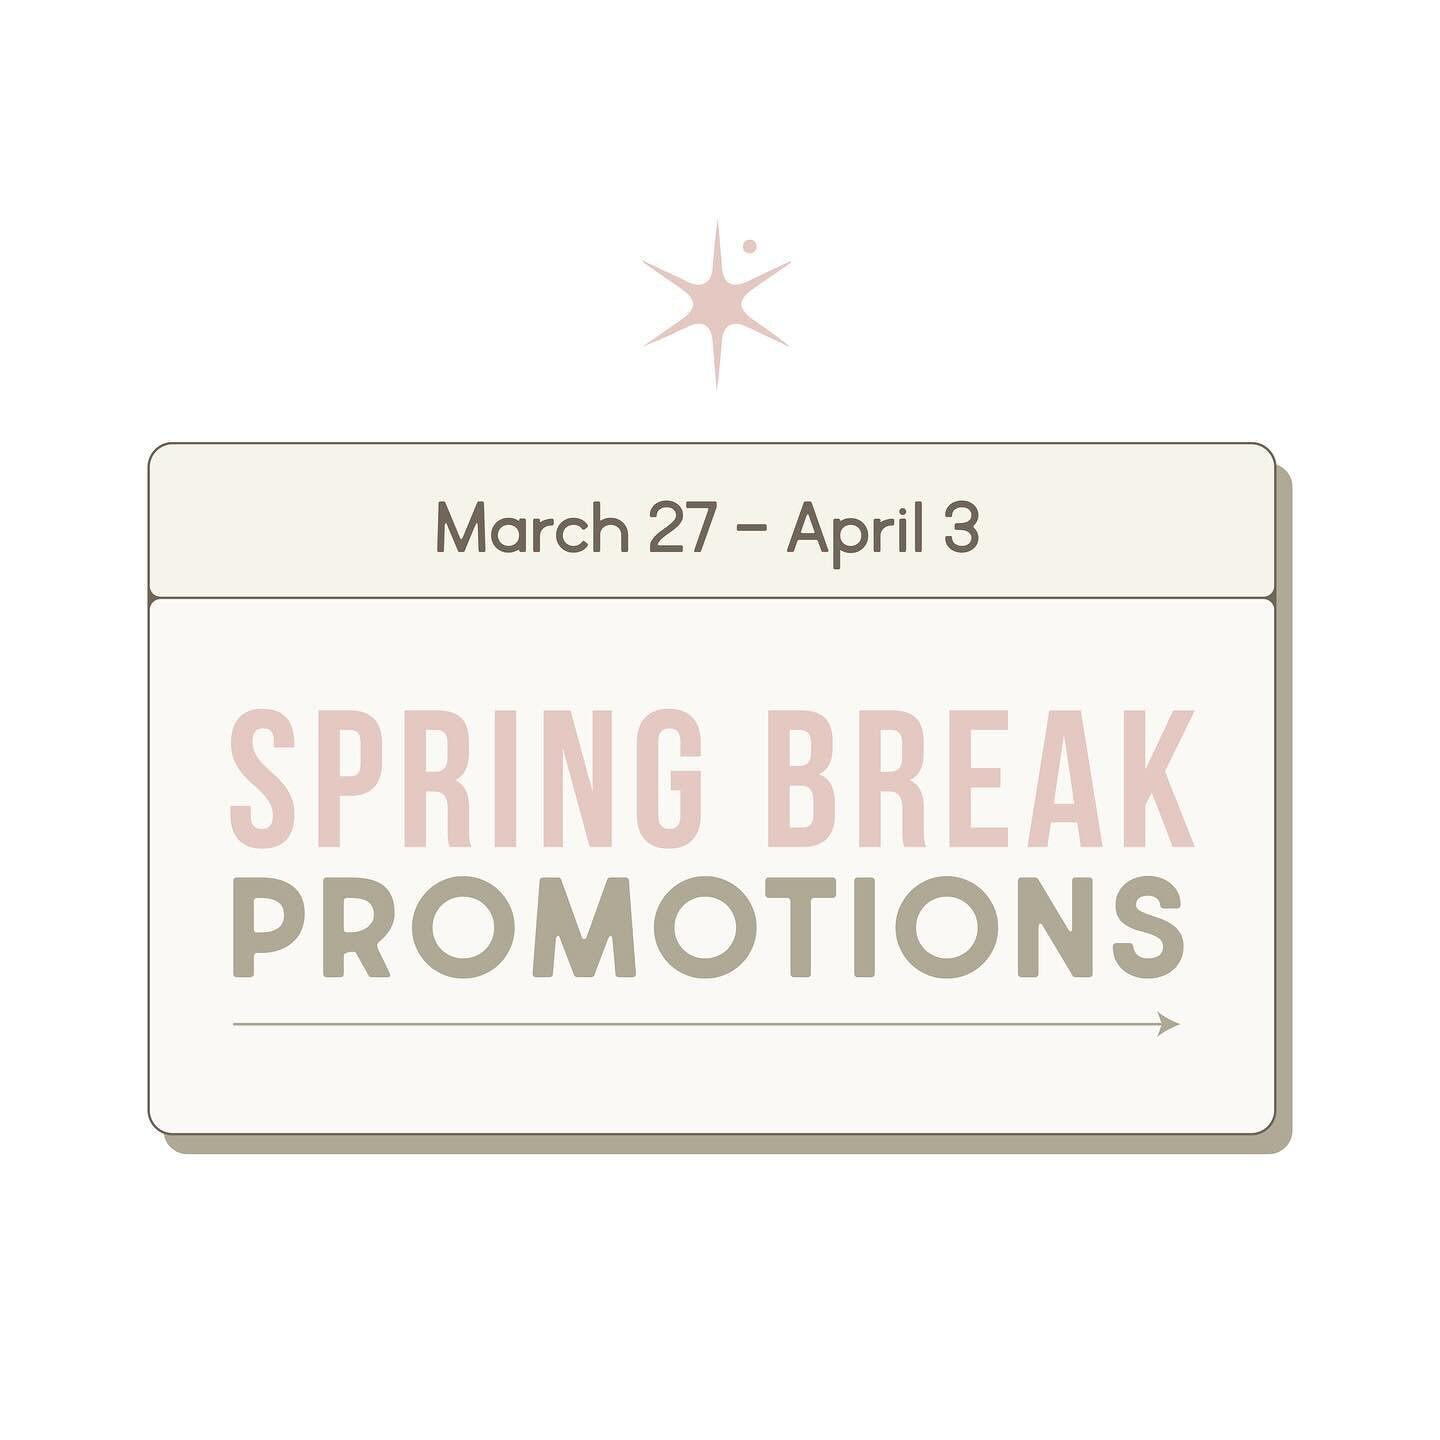 🌸🌞SPRING BREAK PROMOS🌞🌸

Valid through: March 27-April 3rd
Call 845-501-4215 OR book online at Joliemedispa.com 

(When making your reservation, kindly indicate that you wish to utilize our spring break promotion during checkout)

PROMOS:
🌸 Scle